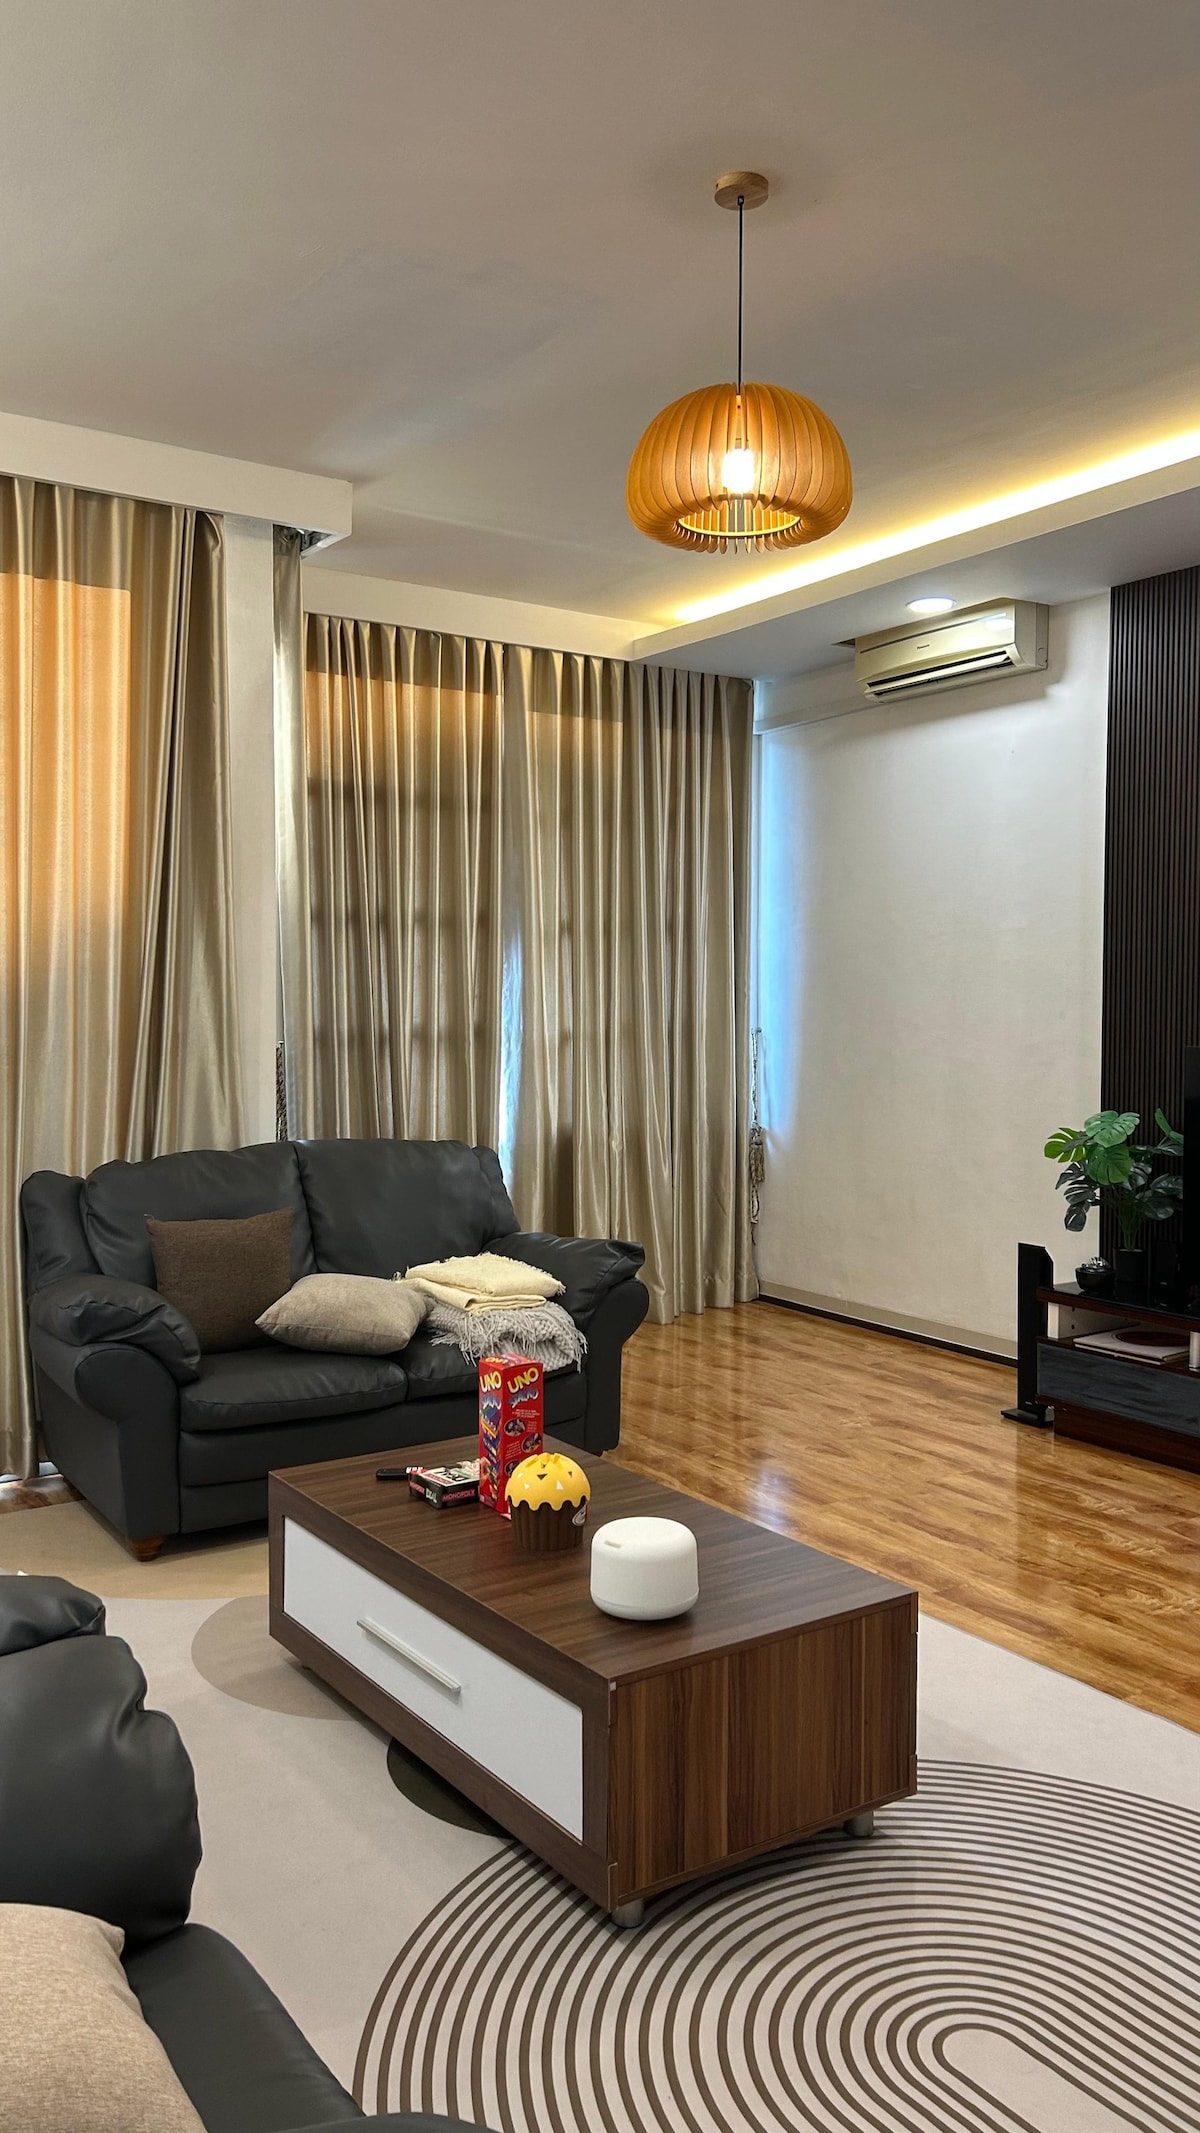 Relax & Chill 4BR Terrace House